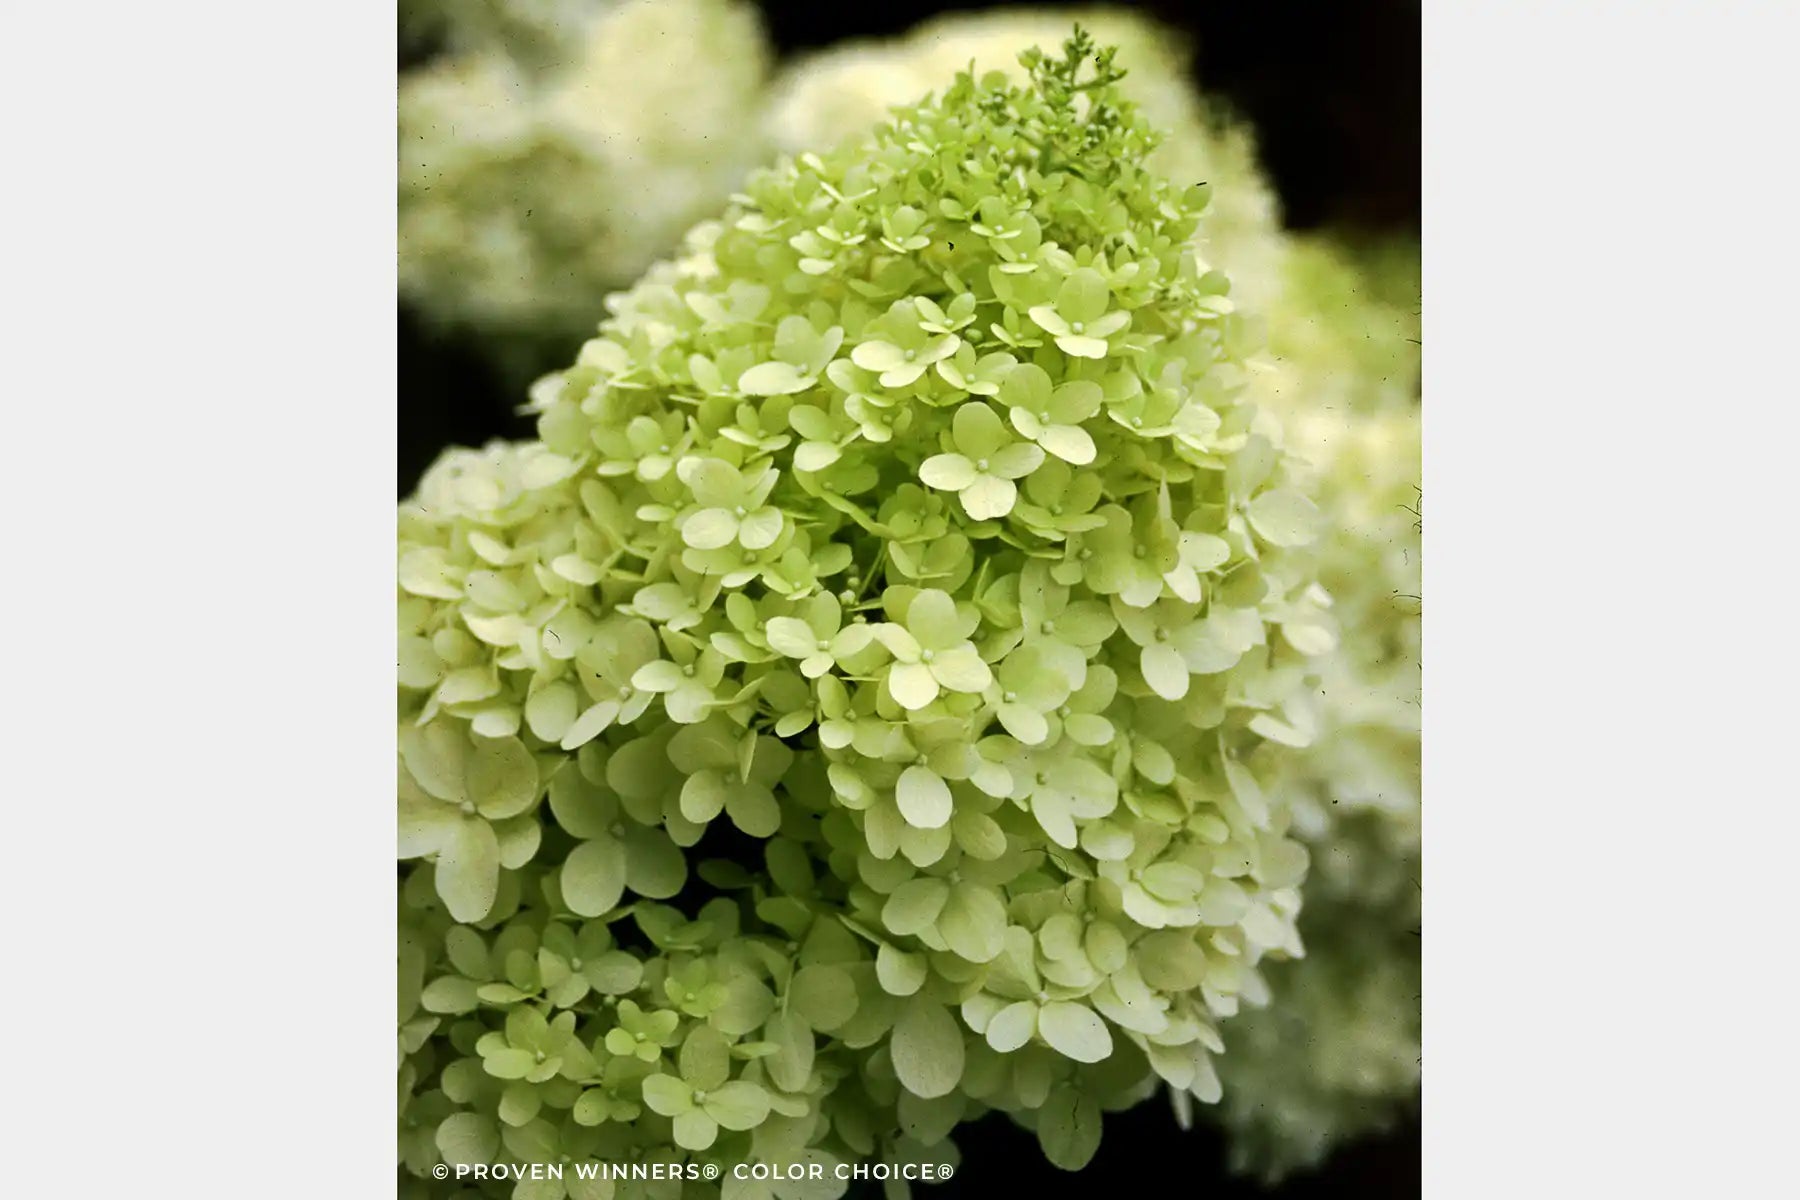 Extreme closeup of a single Limelight Hydrangea flower that emerges with creamy white petals that turn into a chartreuse green later in the cycle. In the autumn, these will fade into a pale pink color.